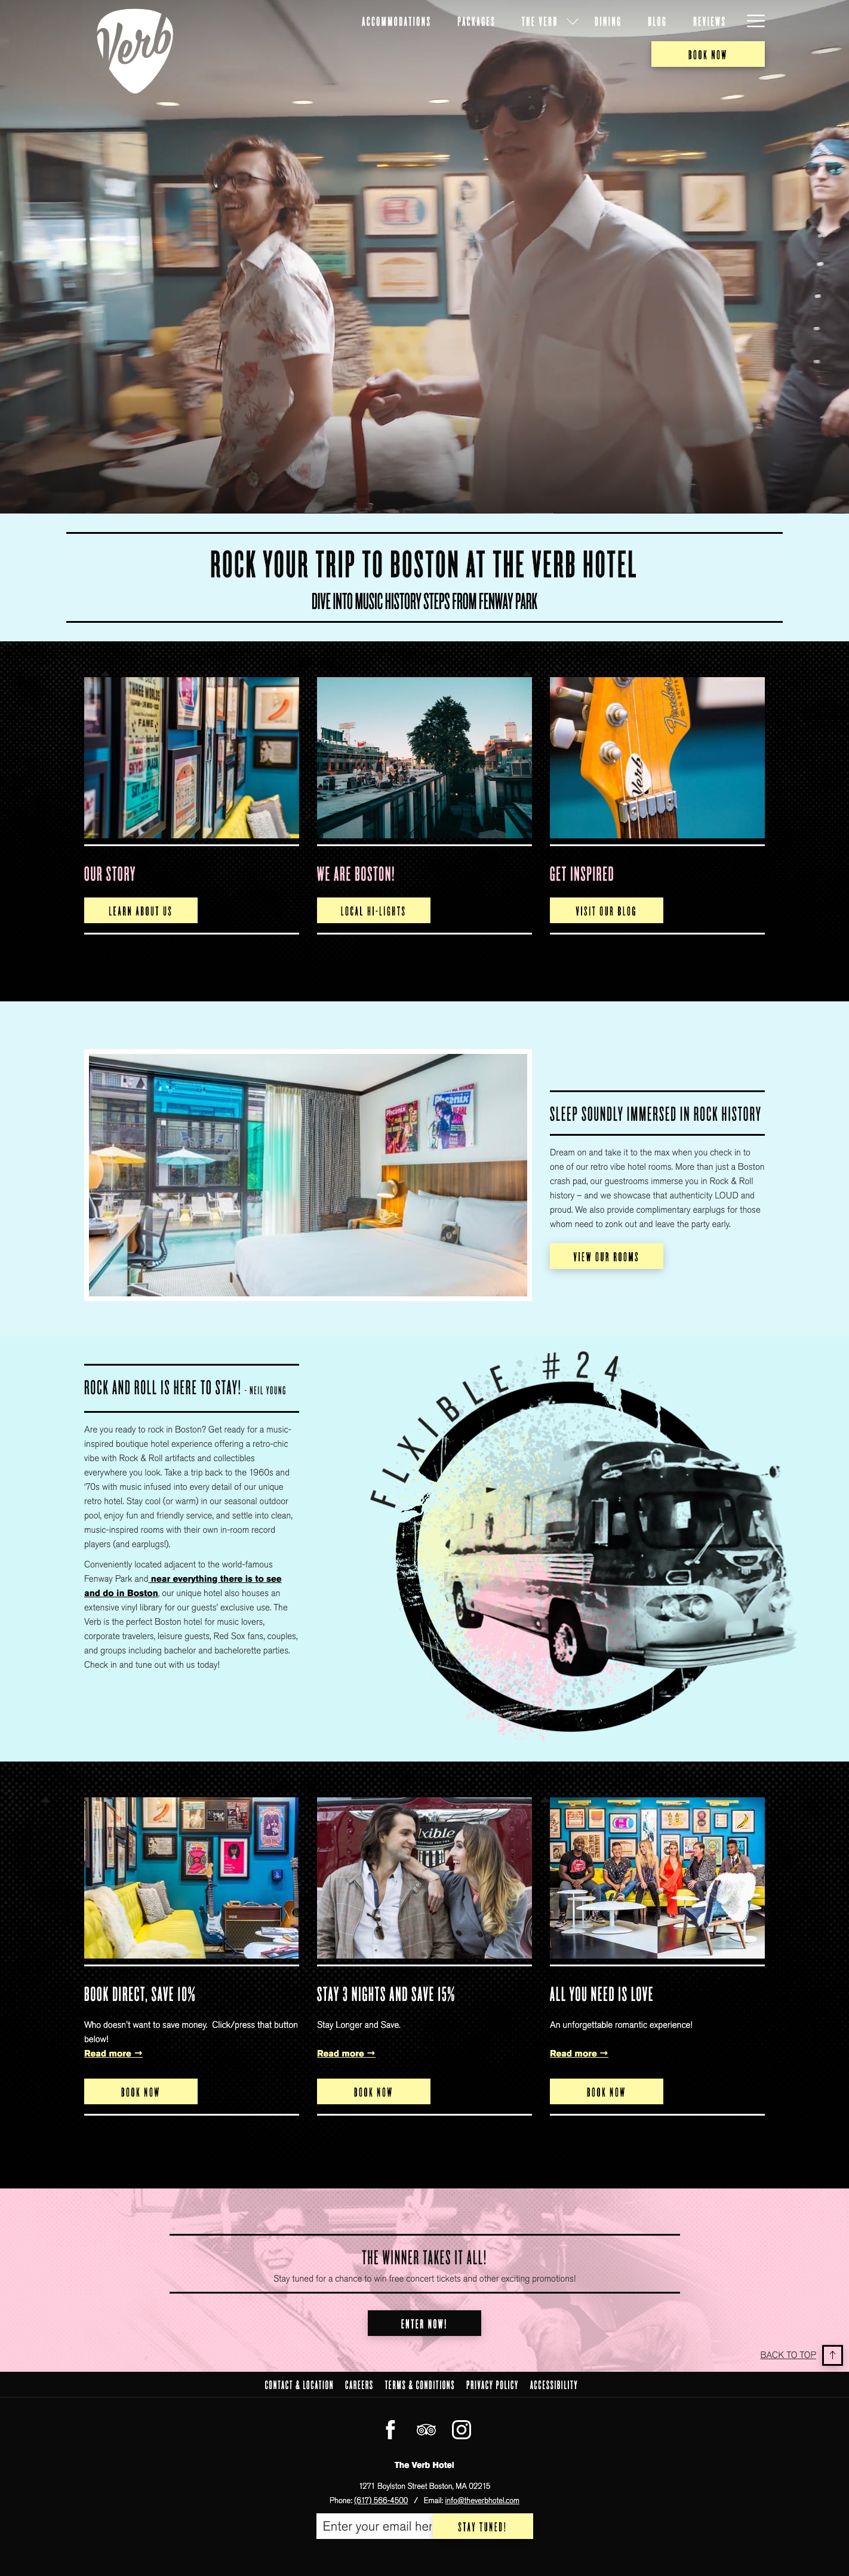 The Verb Hotel - Home Page Design